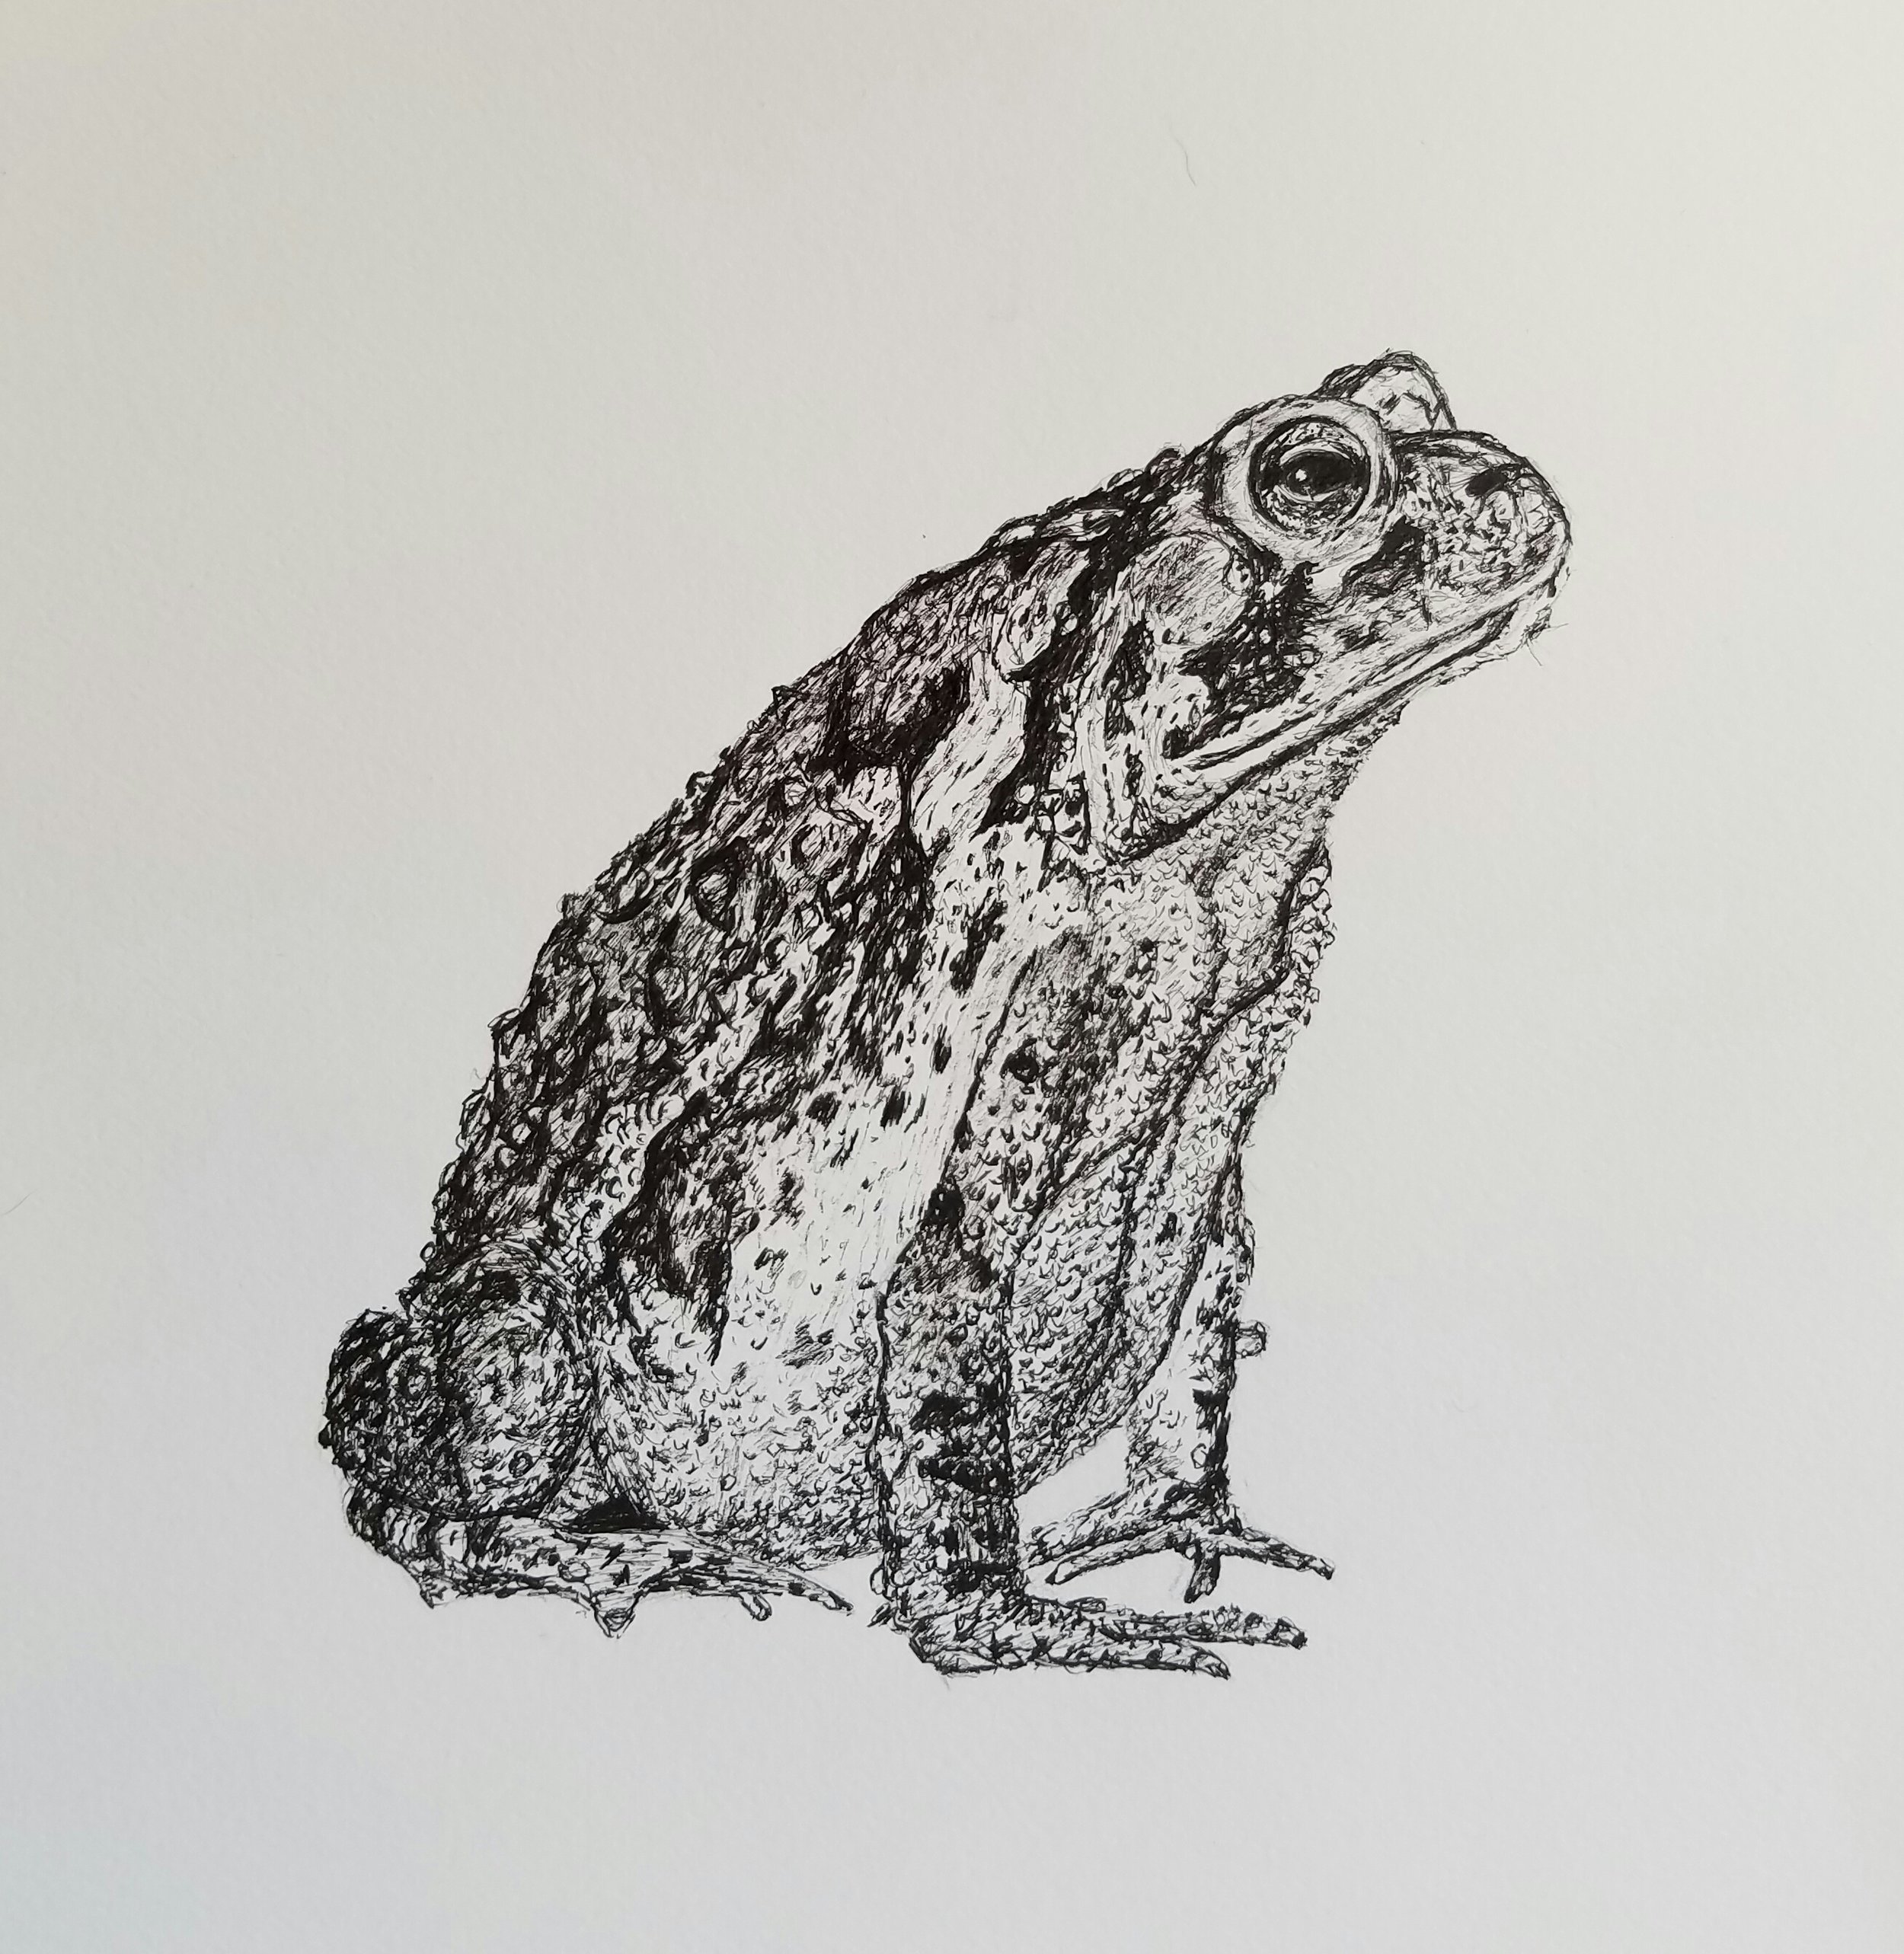 American toad, pen and ink, 7"x 7", 2017